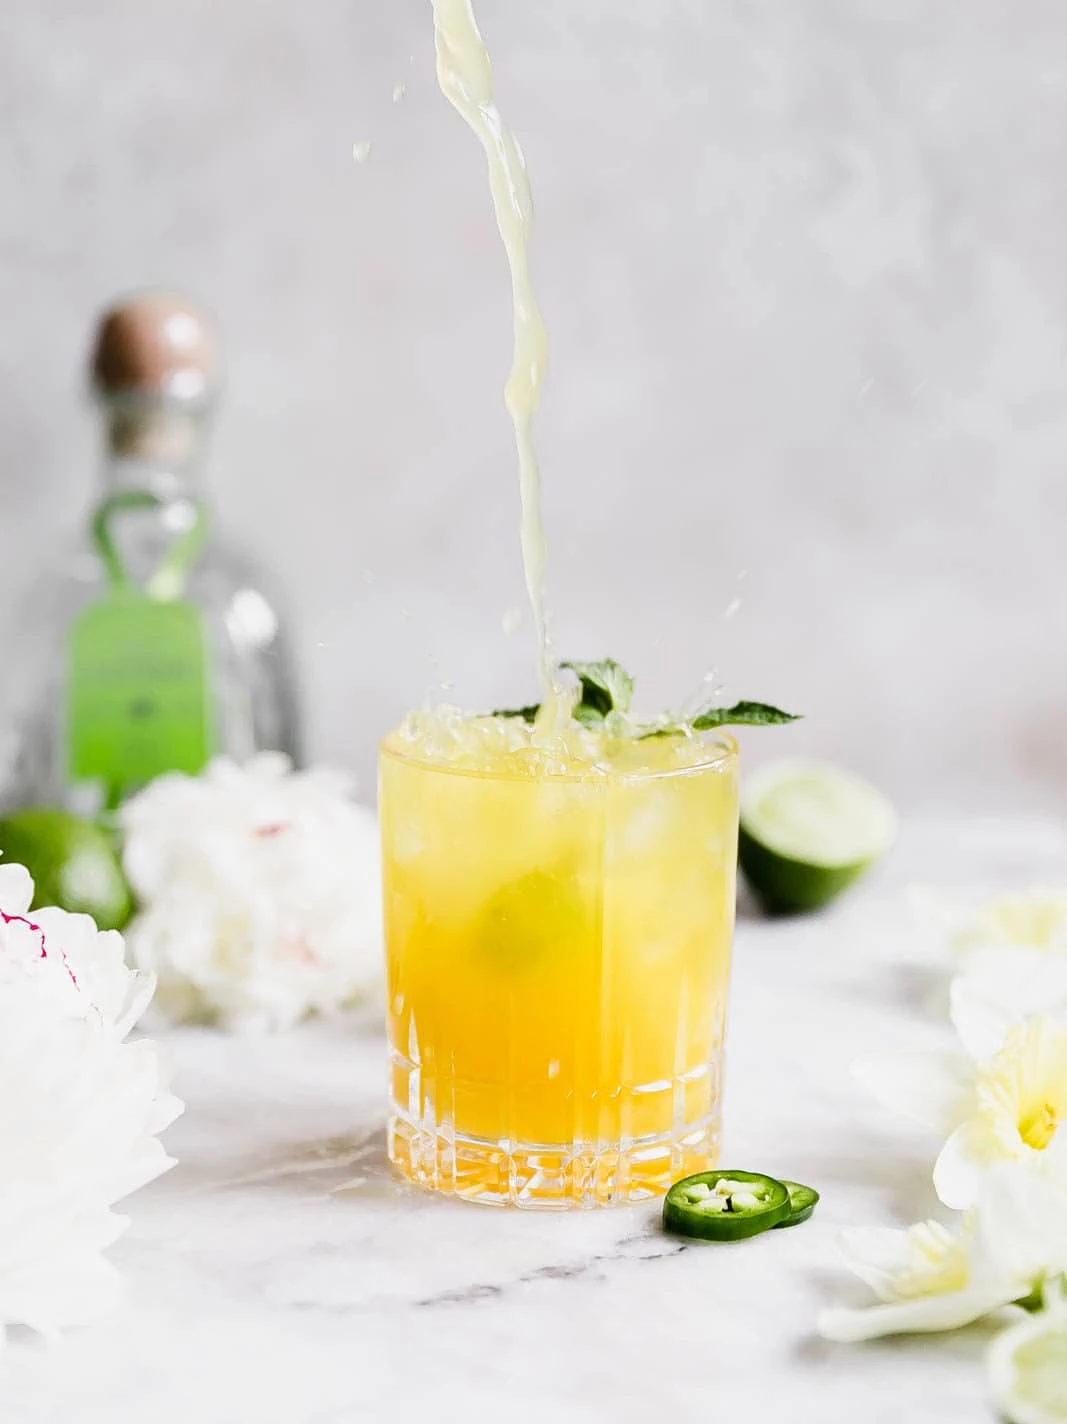 A ridiculously refreshing Spicy Passionfruit Margarita made with a homemade spicy passionfruit syrup, orange liqueur, and tequila